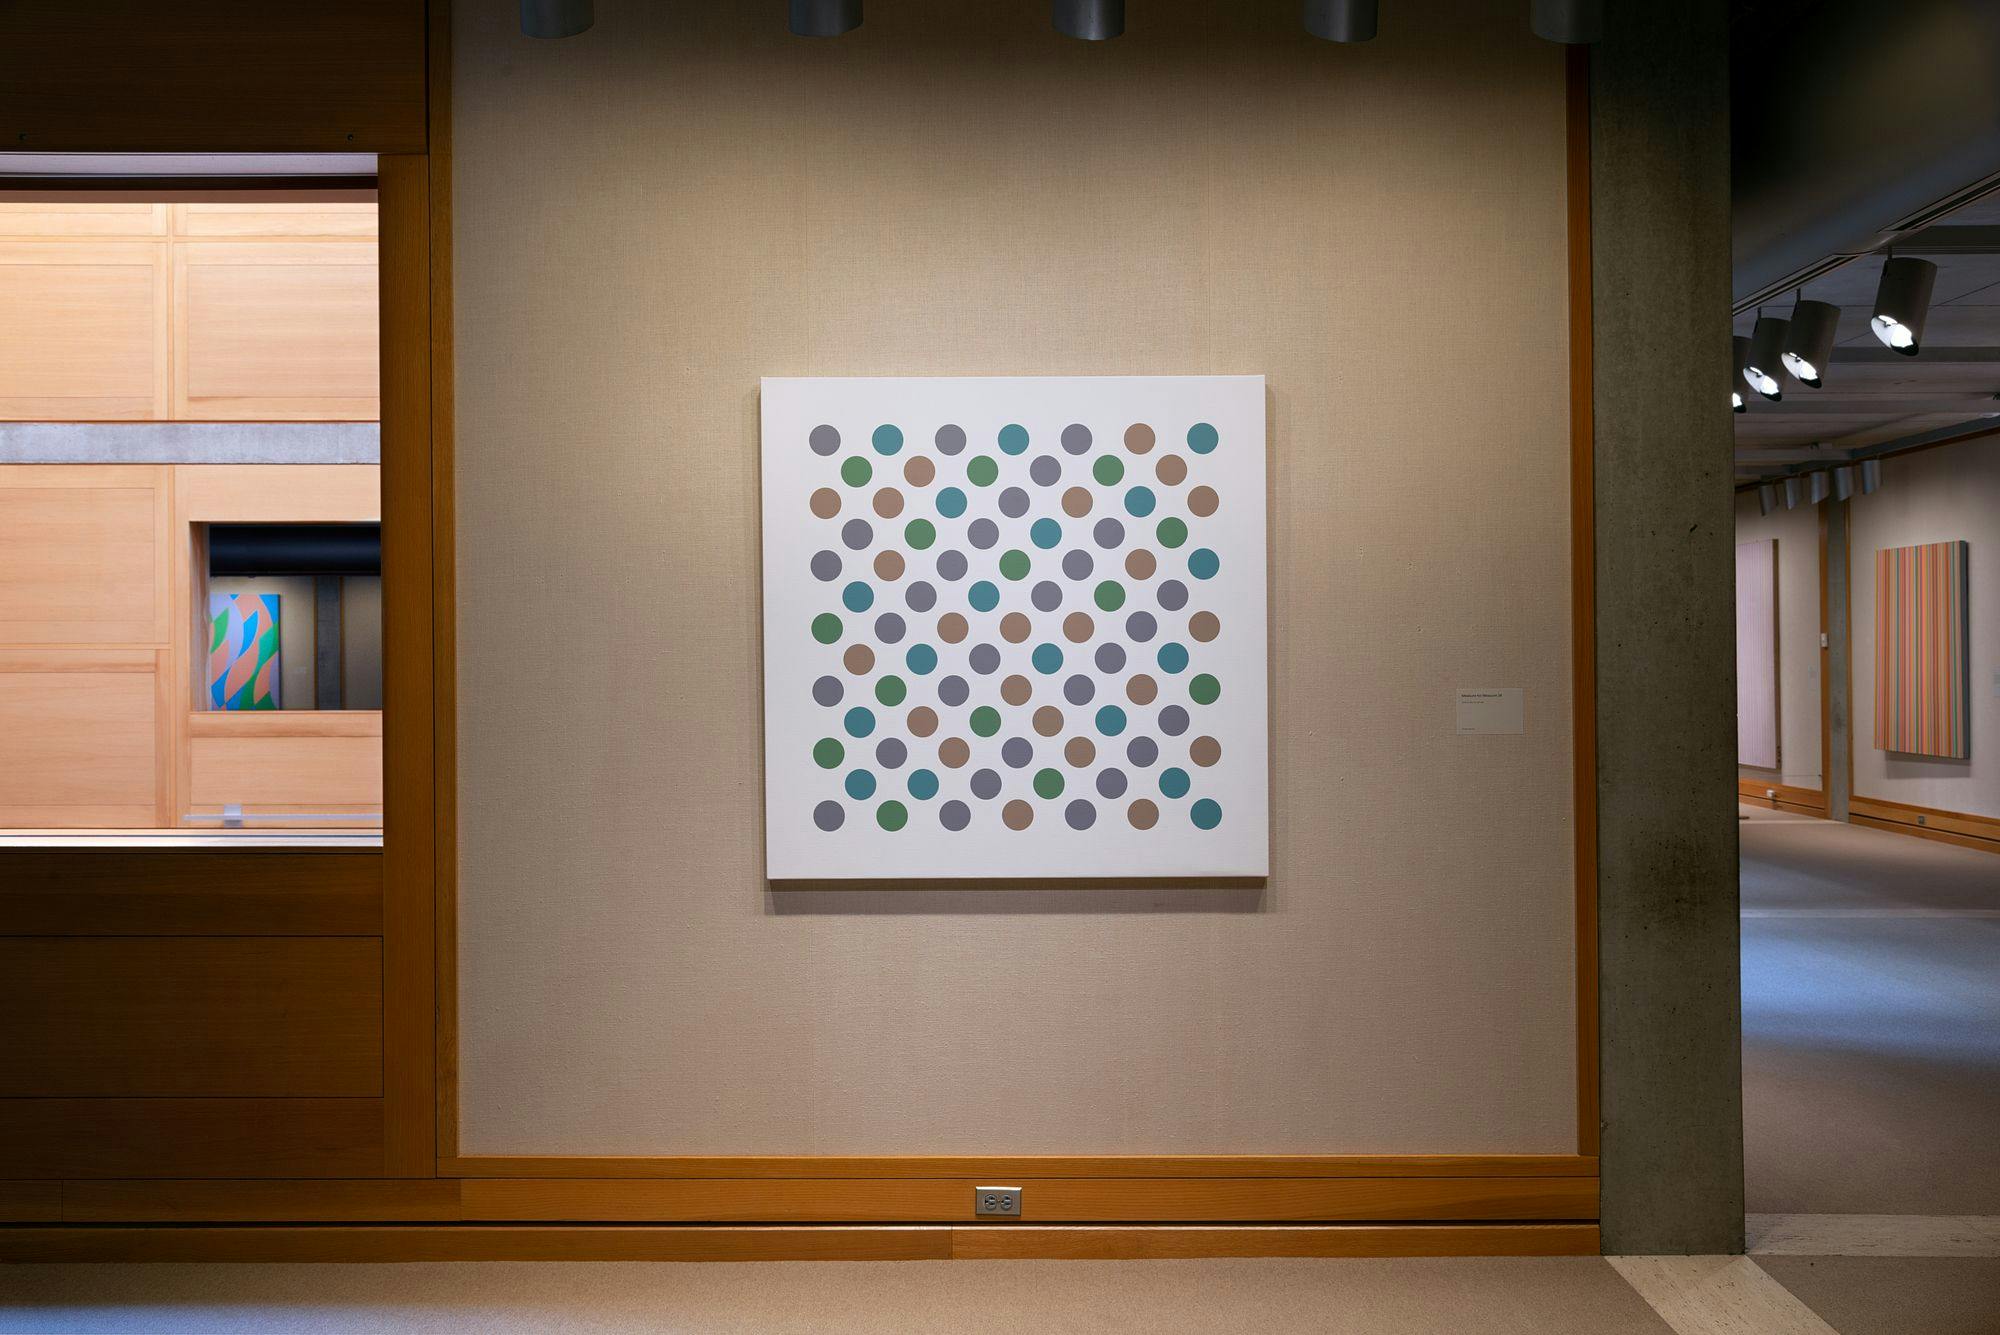 Installation view of the exhibition, Bridget Riley: Perceptual Abstraction, at The Yale Center for British Art, in New Haven, Connecticut, dated 2022.